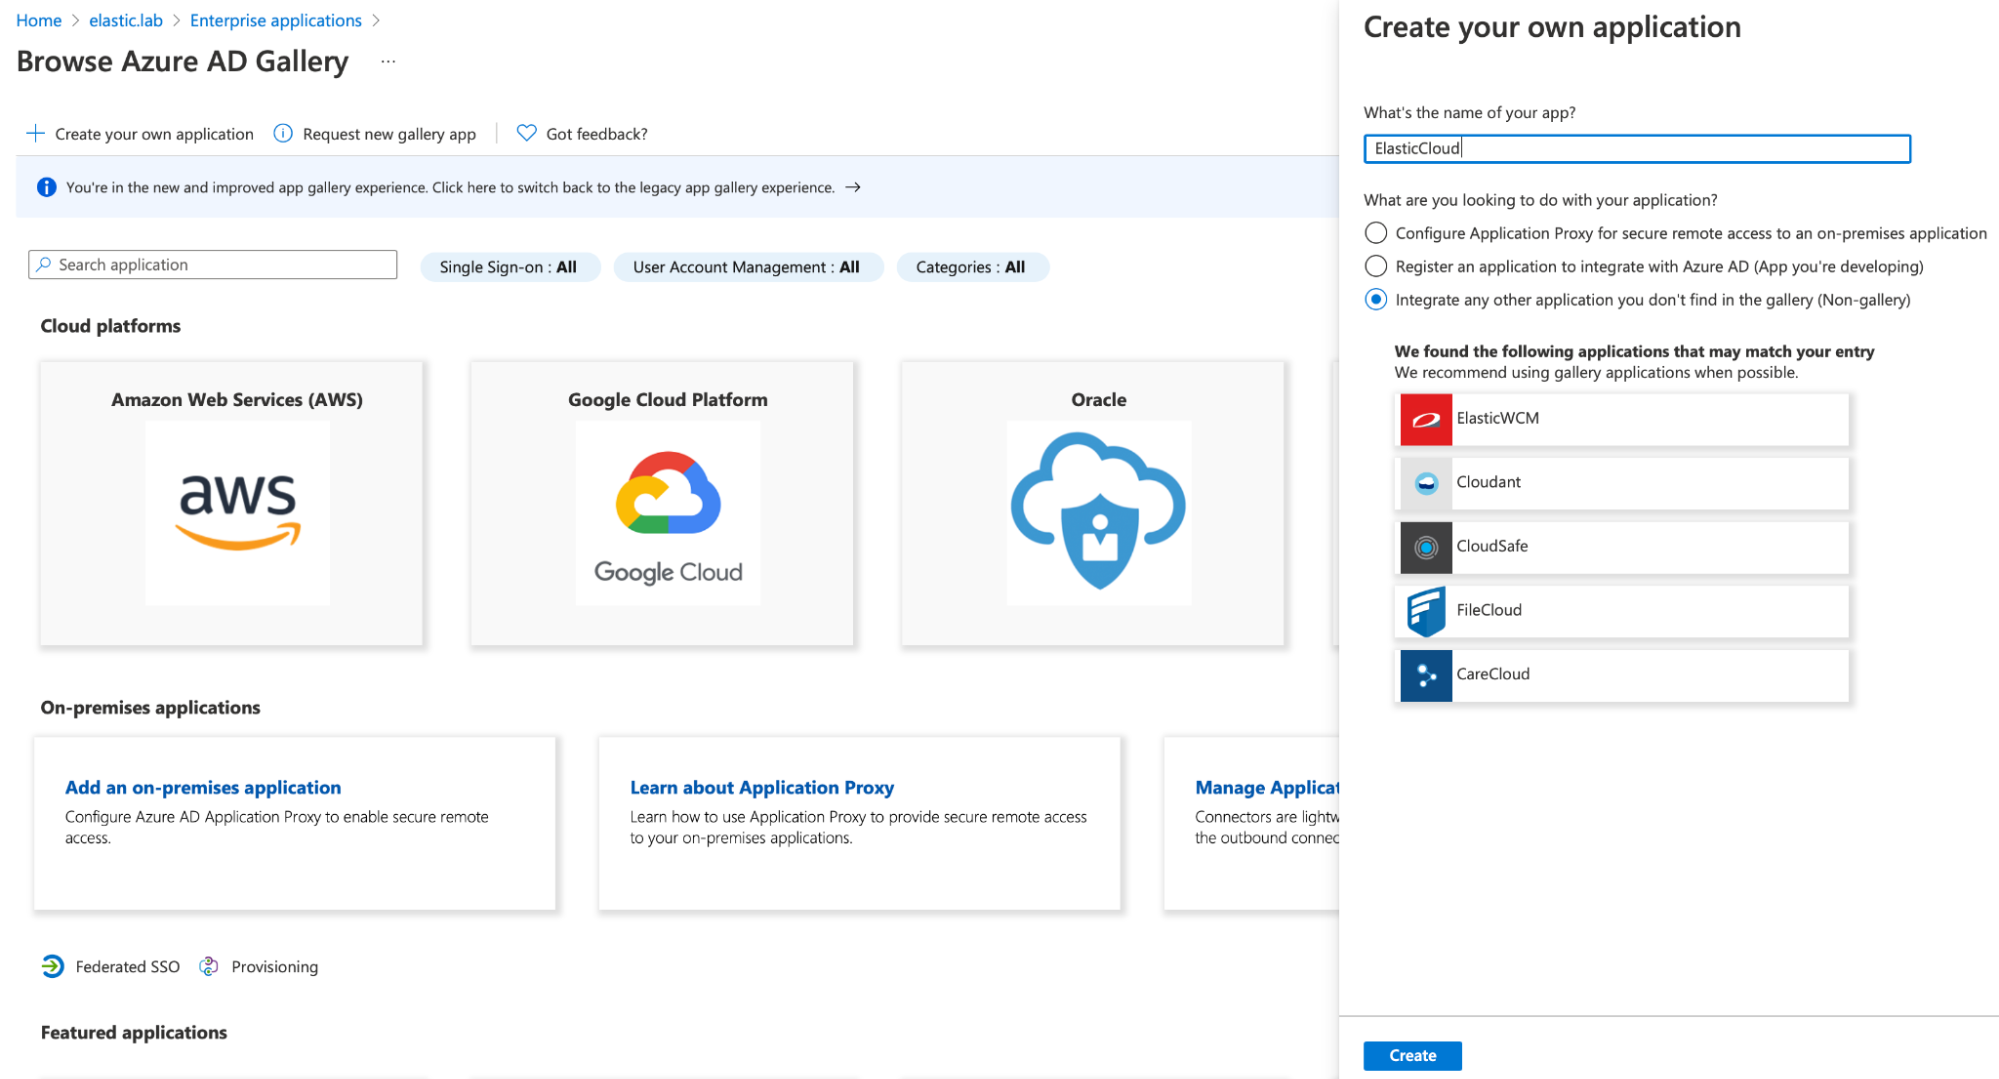 The Azure Create your own application flyout